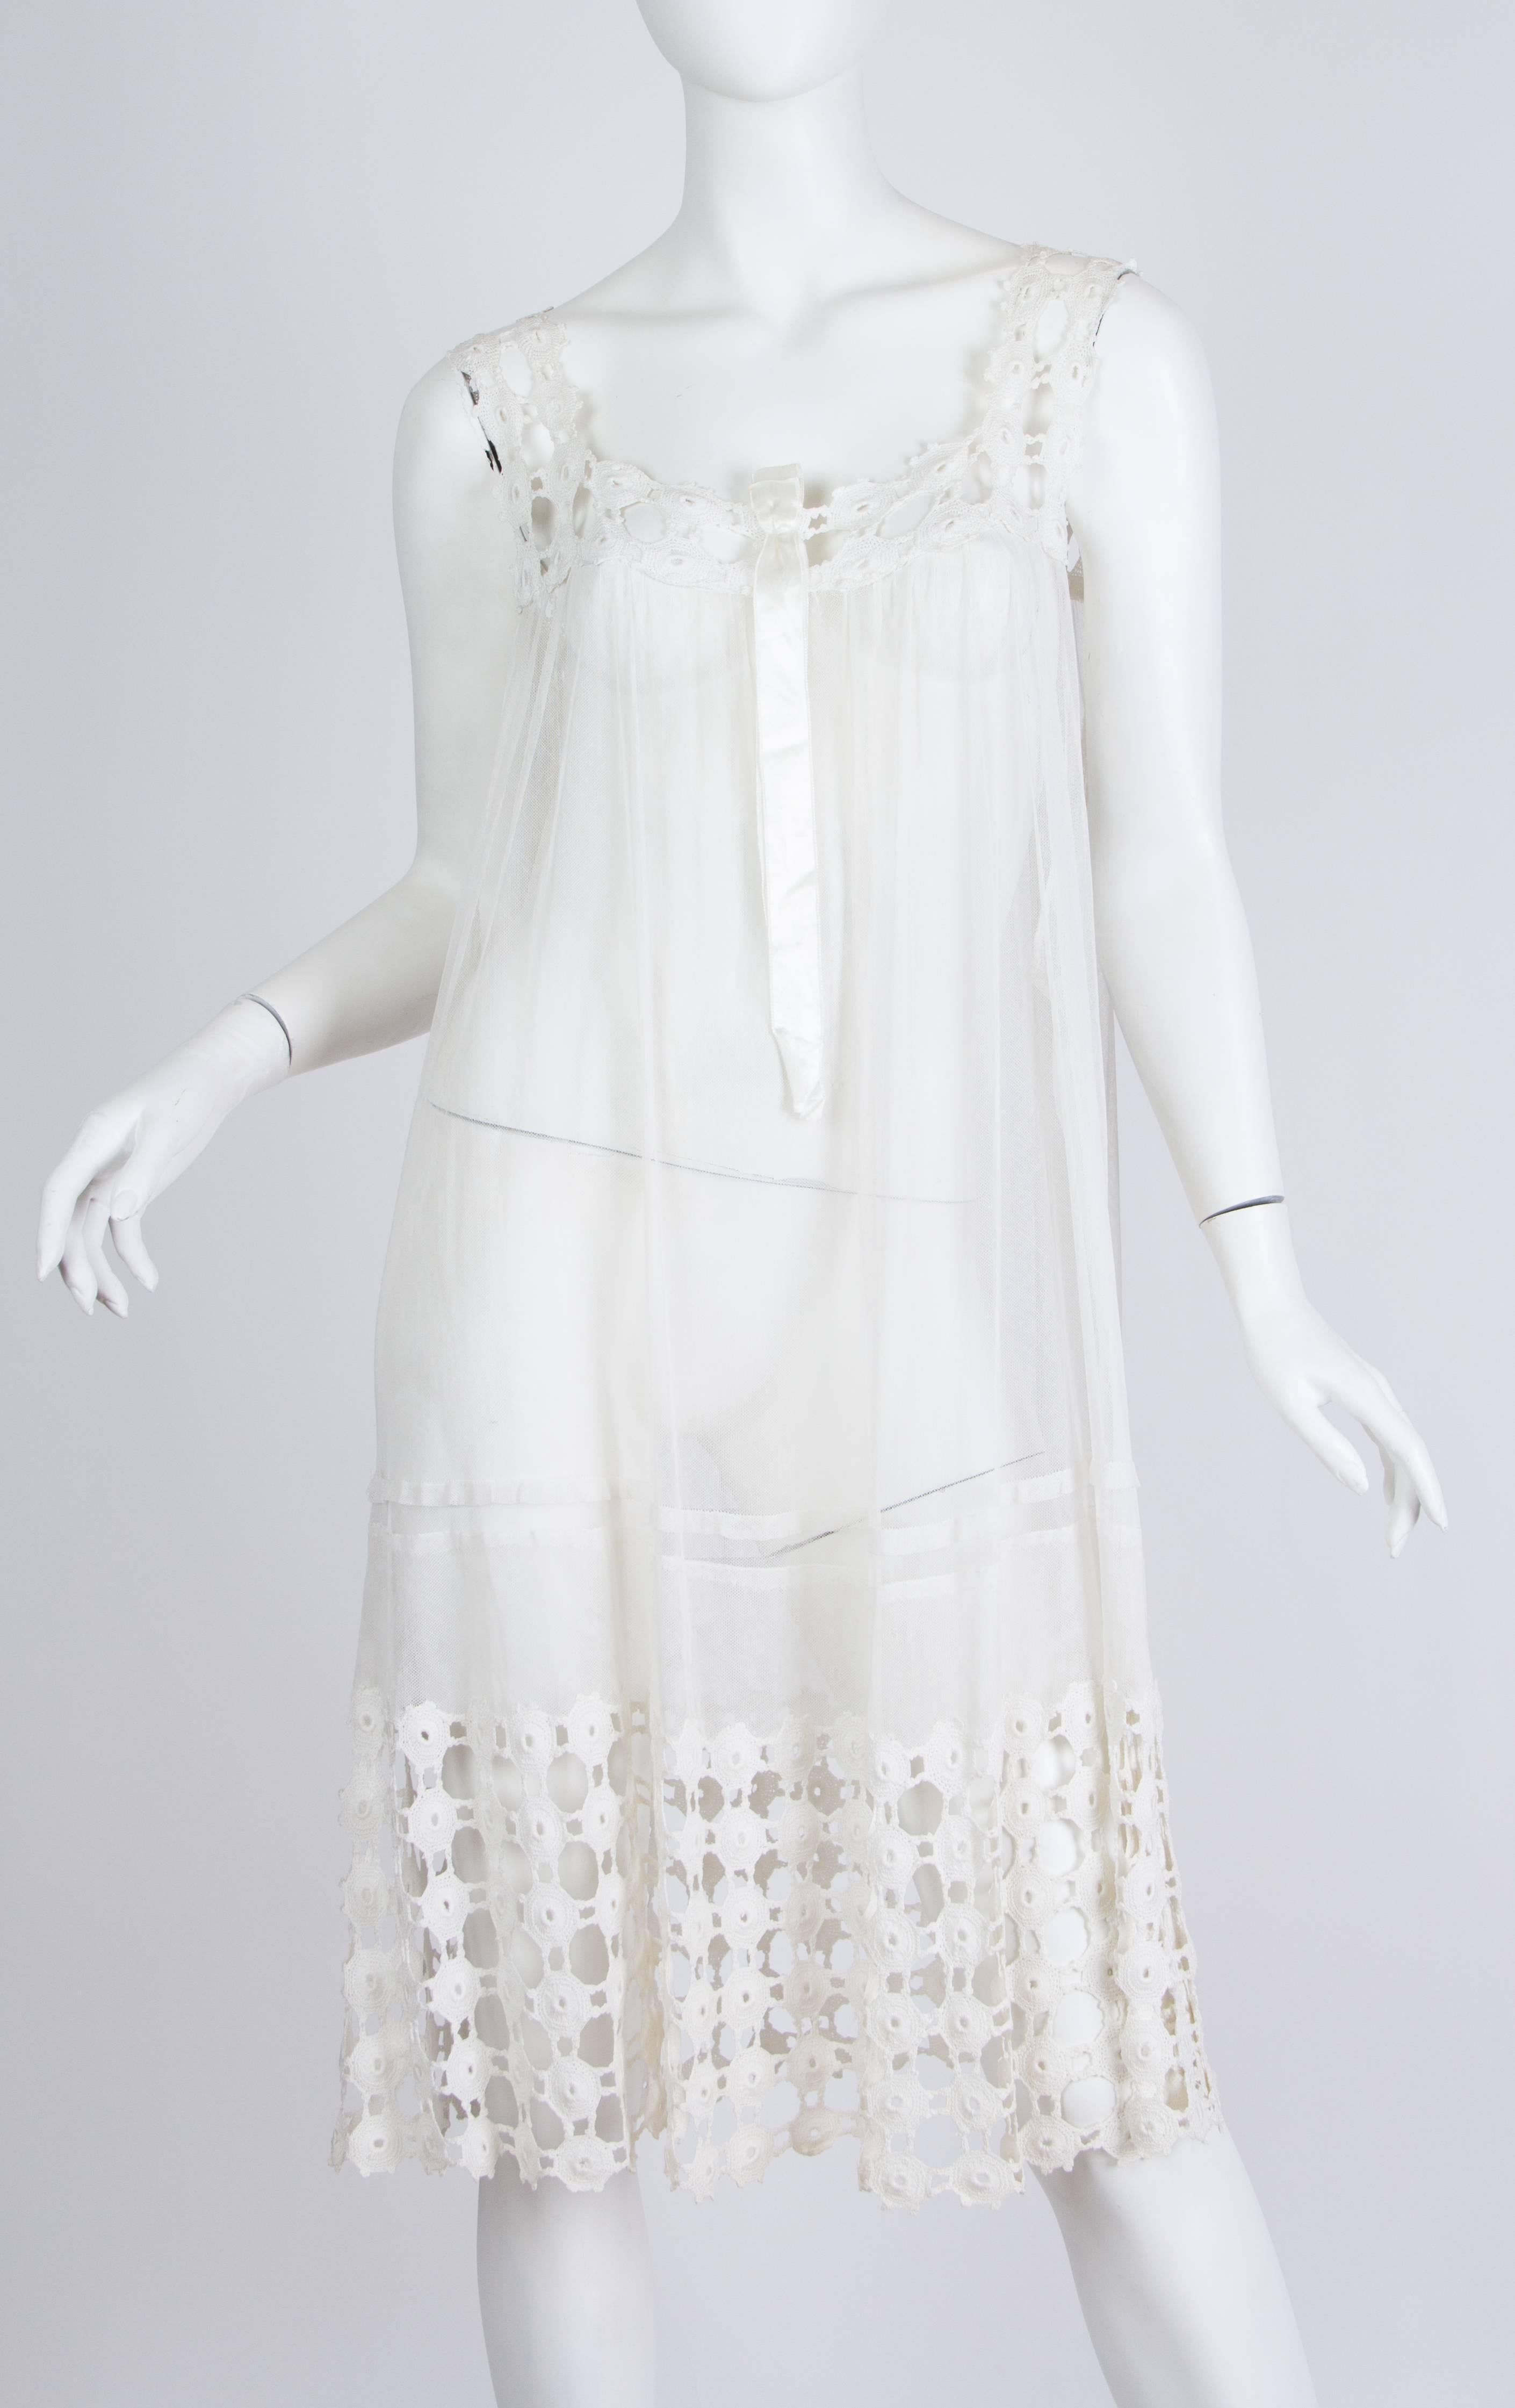 Dress is sheer and would be a great swim cover-up. 100% cotton and very wearable and washable for a piece this age. 